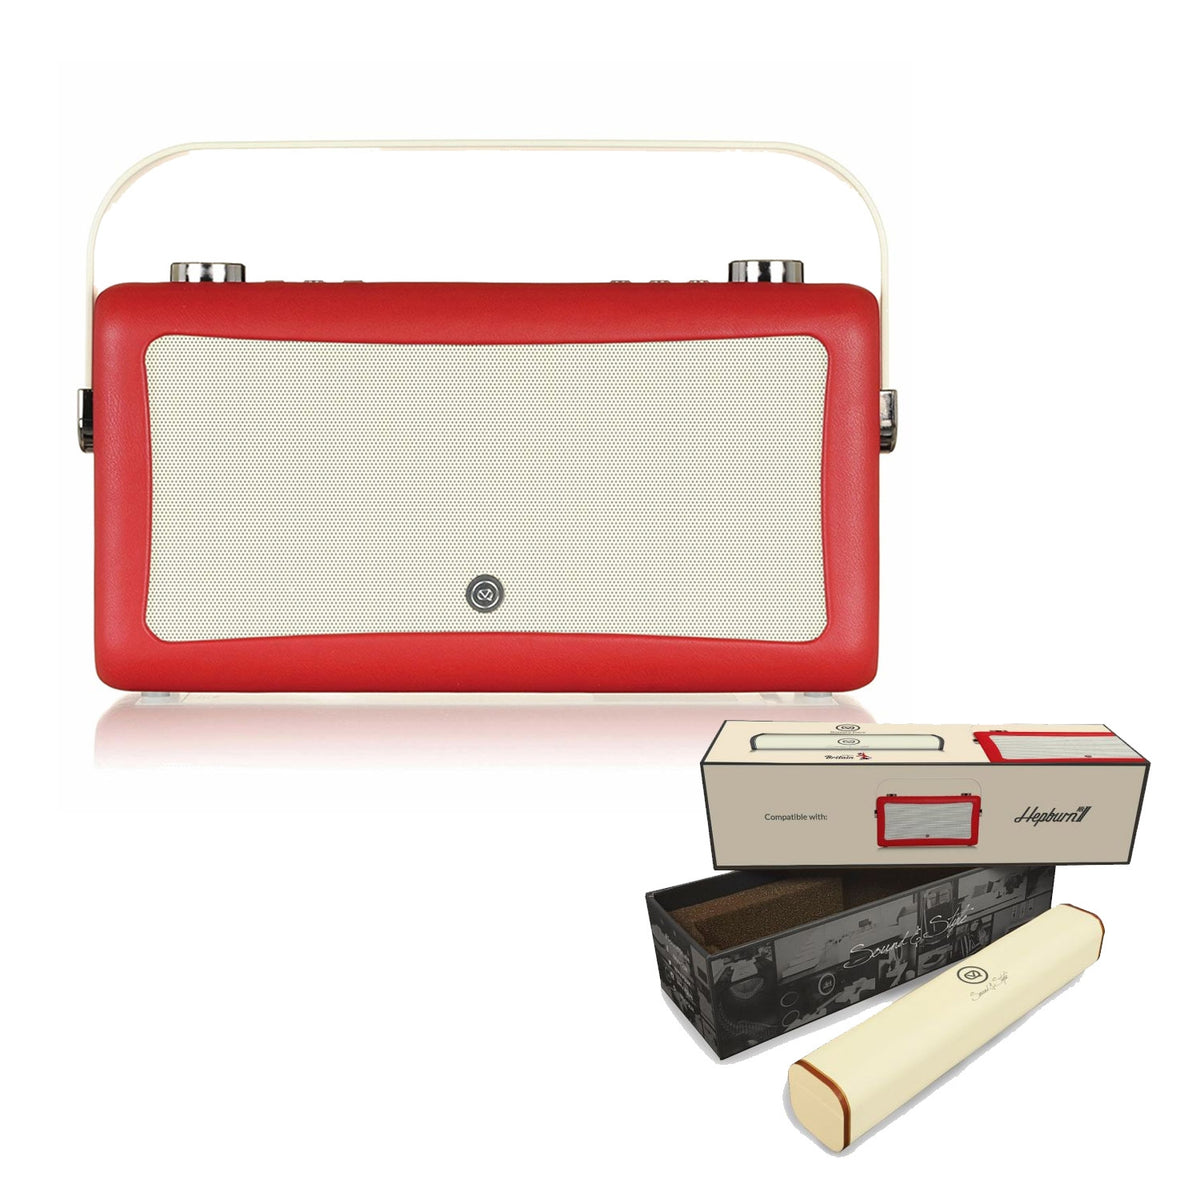 VQ Hepburn Mk II Portable DAB+/FM Radio & Bluetooth Speaker with Rechargeable Battery Pack in Red - 1